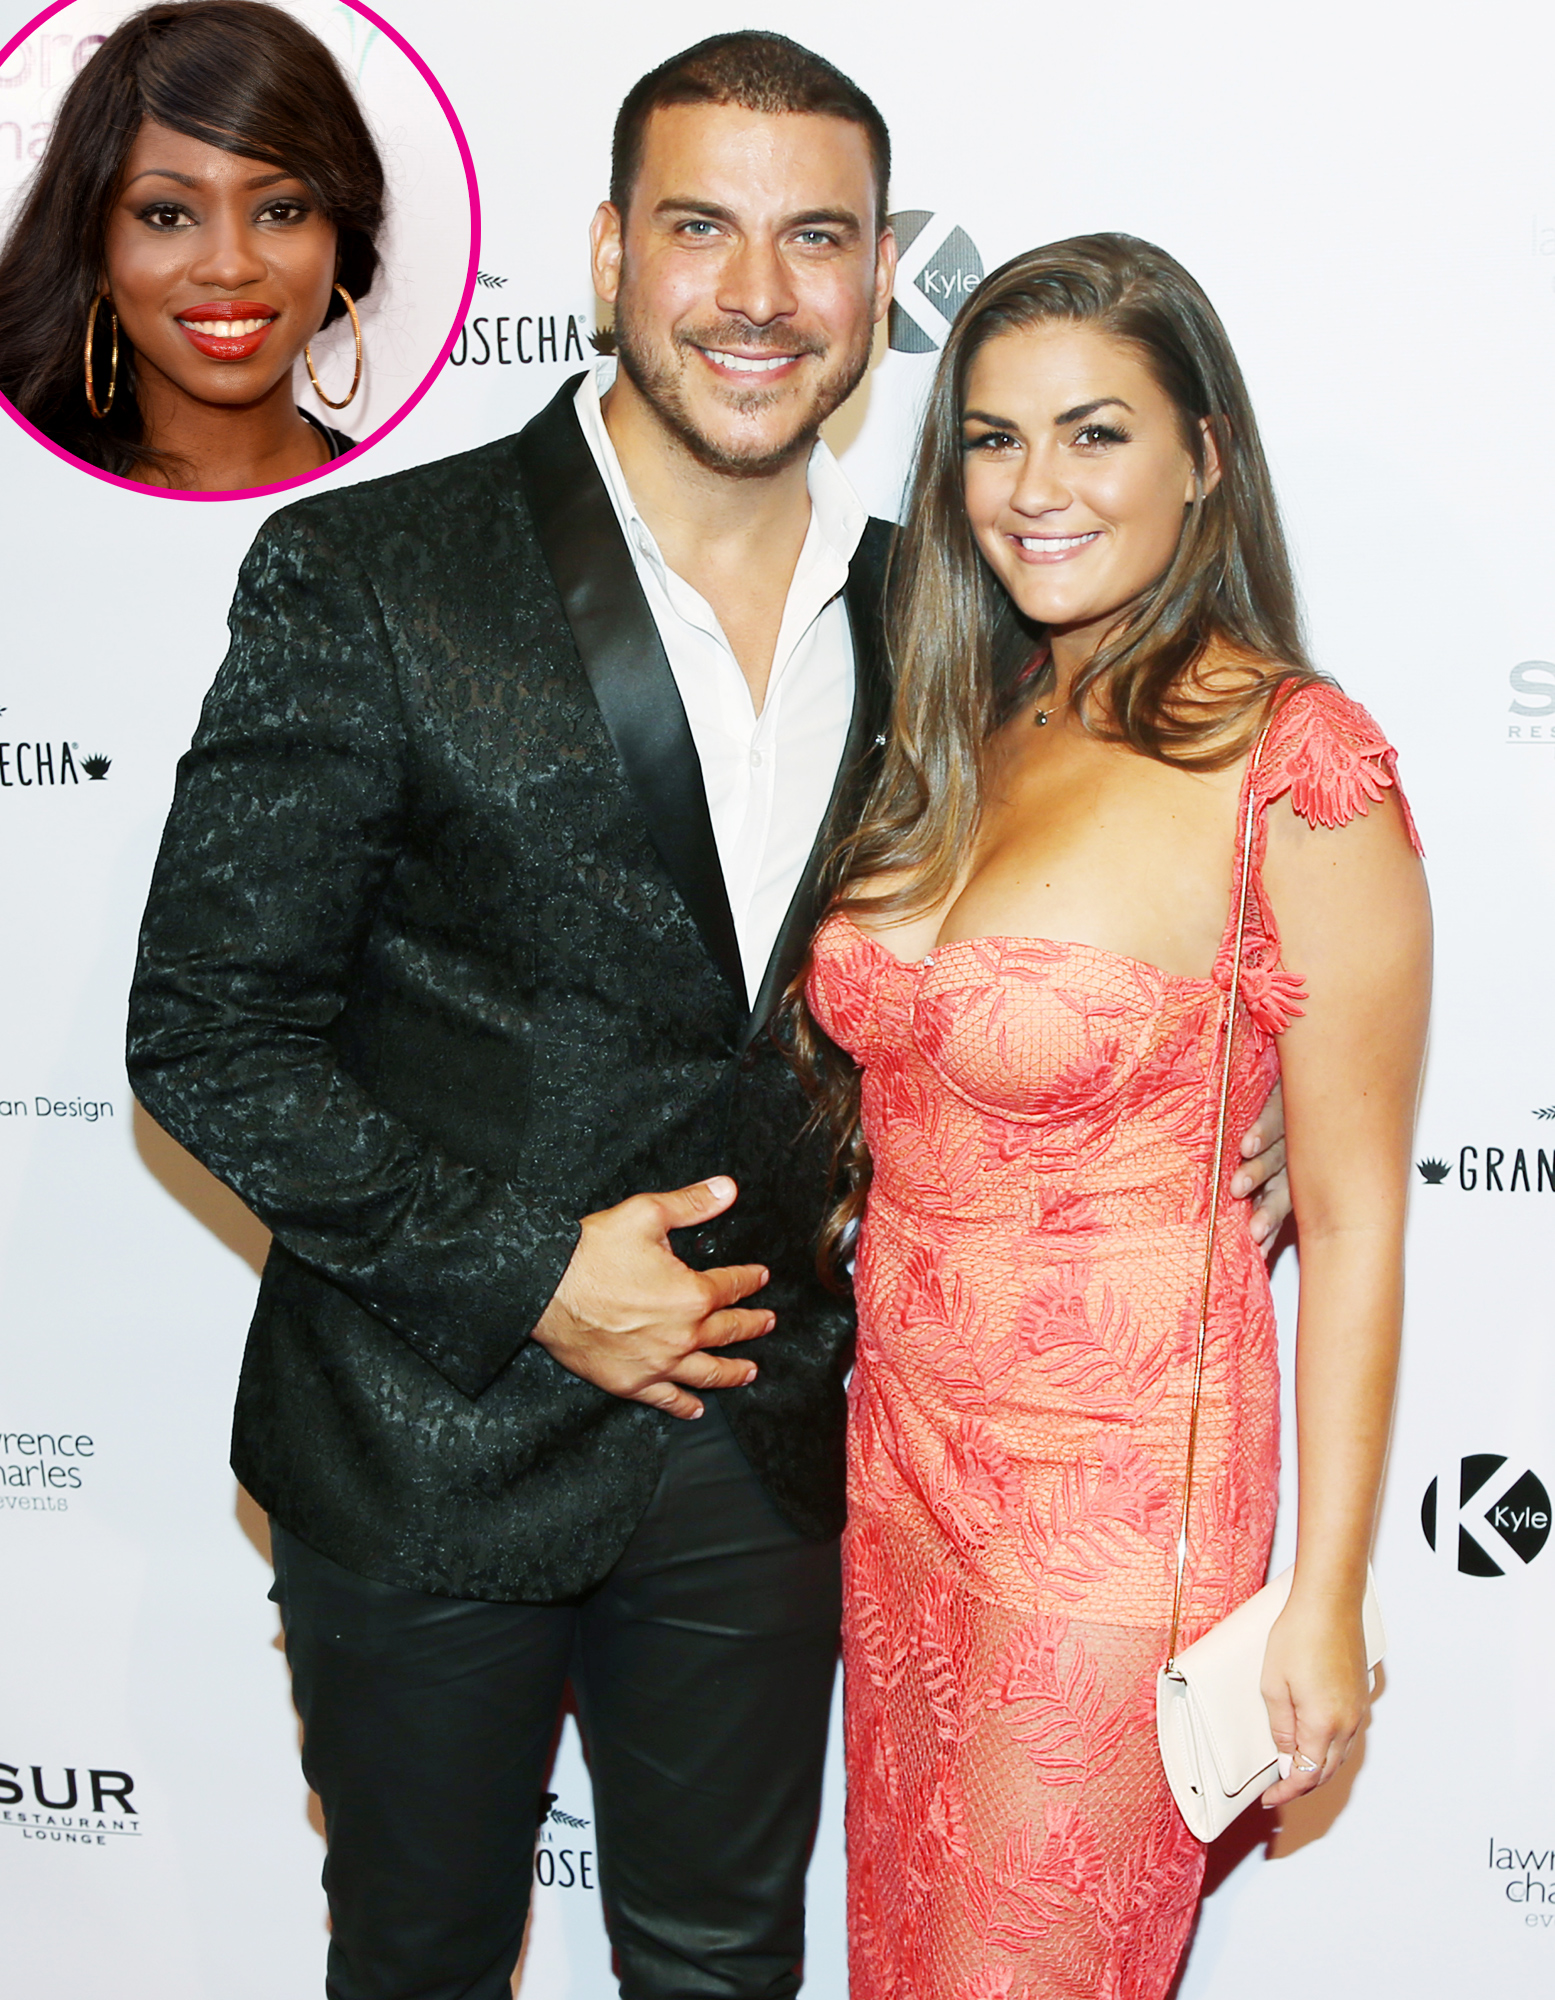 3 Jax Taylor and Brittany Cartwright Faith Stowers scandal